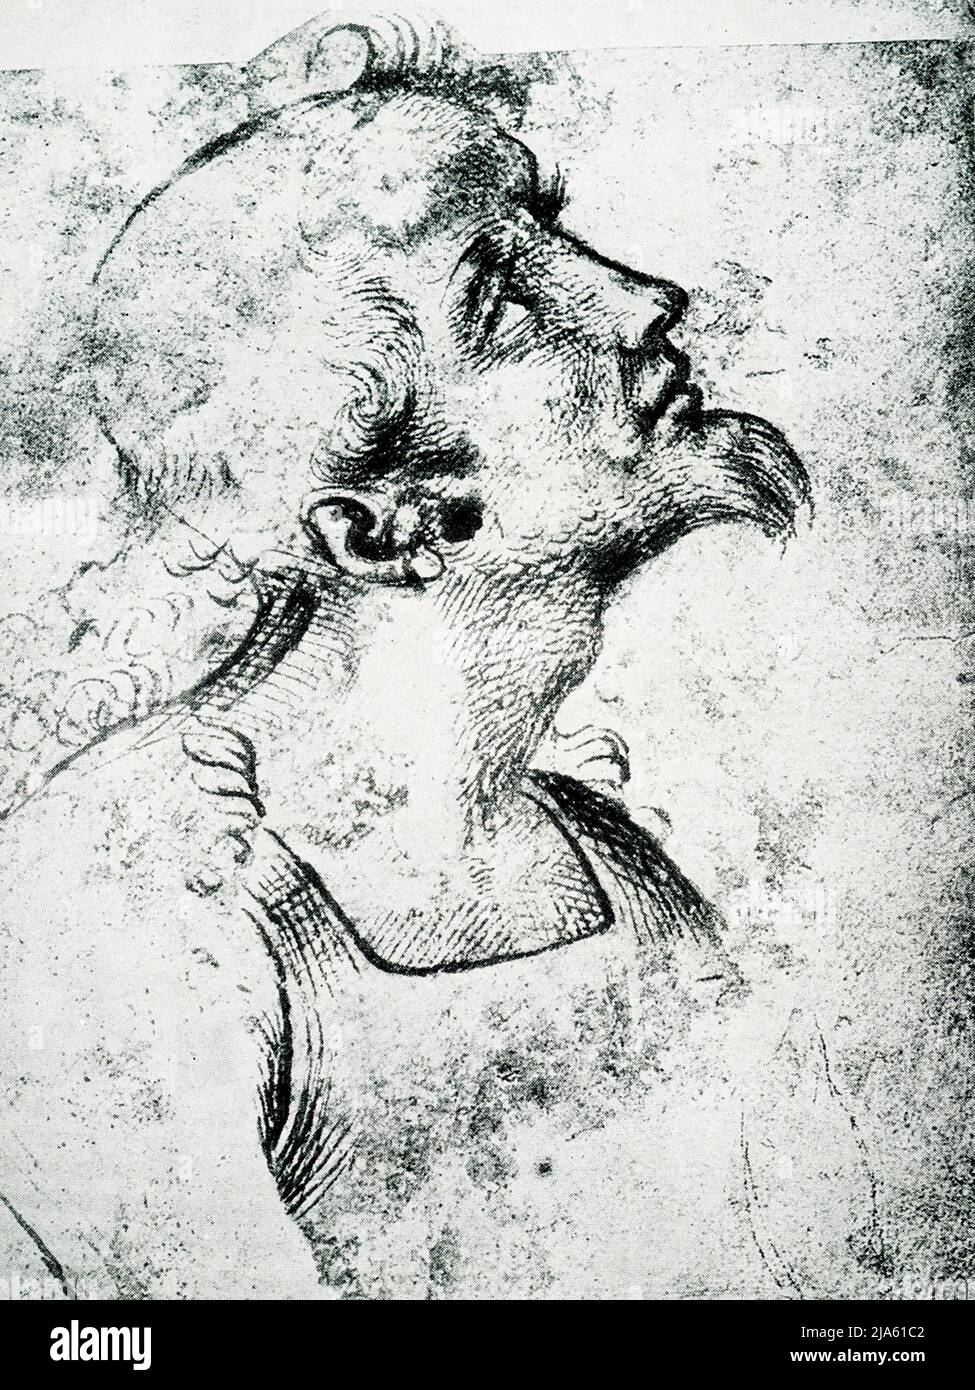 This drawing, Head in Profile, by Raphael (1483-1520) is at the Academy of Fine Arts in Venice. The upturned face may be the head of some saint. Raffaello Sanzio da Urbino was an Italian painter and architect of the High Renaissance. His work is admired for its clarity of form, ease of composition, and visual achievement of the Neoplatonic ideal of human grandeur. Stock Photo